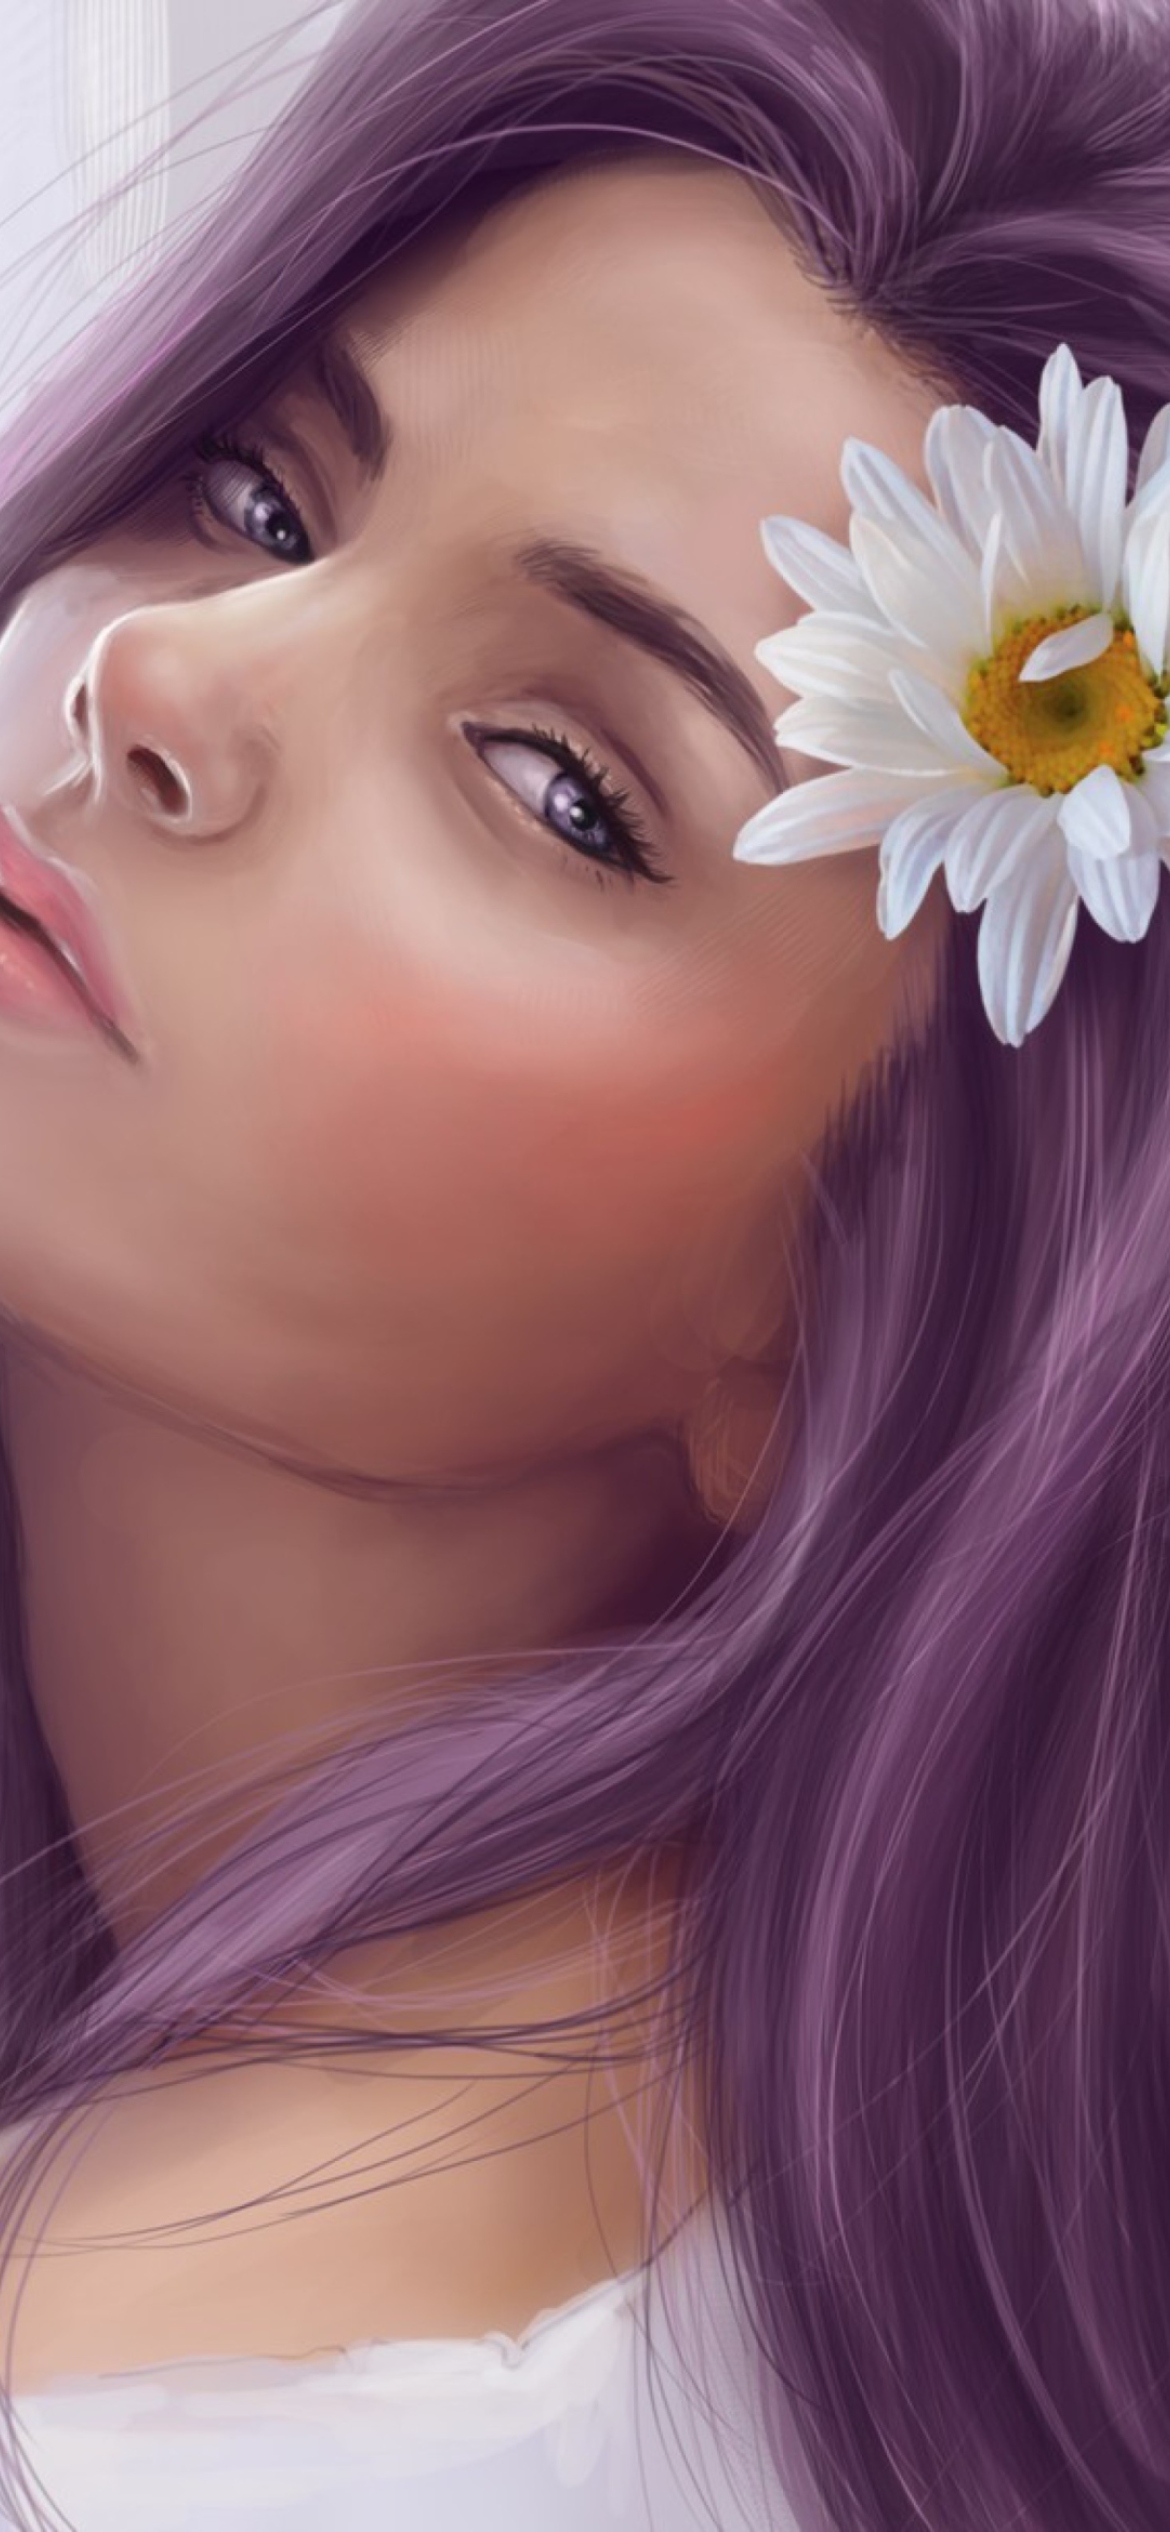 Girl With Purple Hair Painting wallpaper 1170x2532